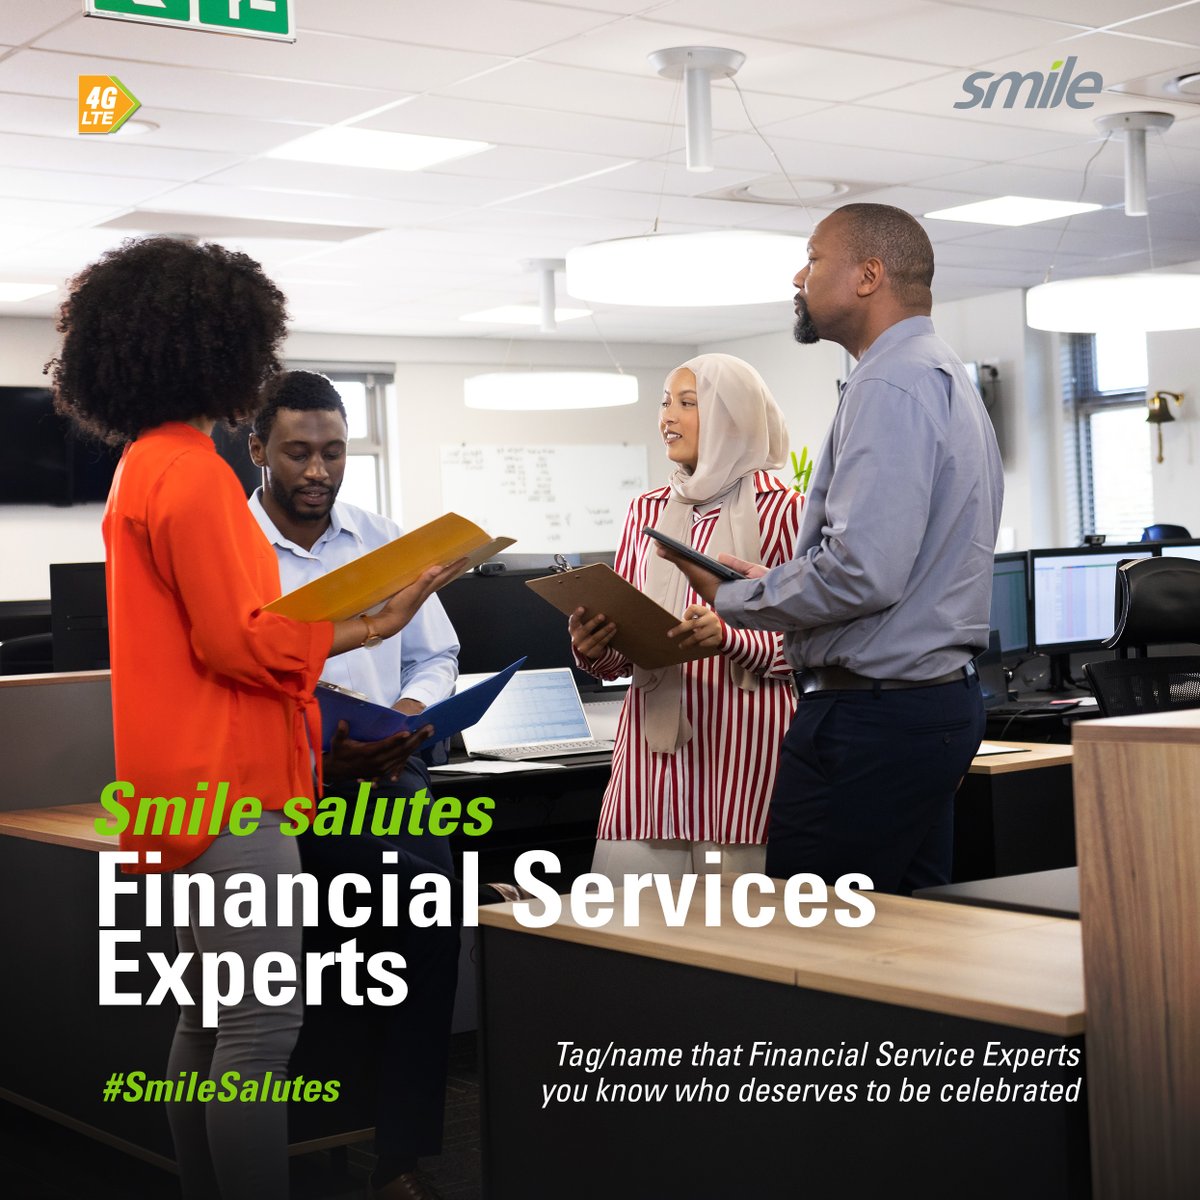 Smile Salutes the calculative tenacity of the Financial Services Experts today

Tag any Financial Service Expert that you know who deserves to be   celebrated.

Highest nominations by reactions wins a special gift. Smile
 
#Smile #SmileSalutes #workersday #celebrate